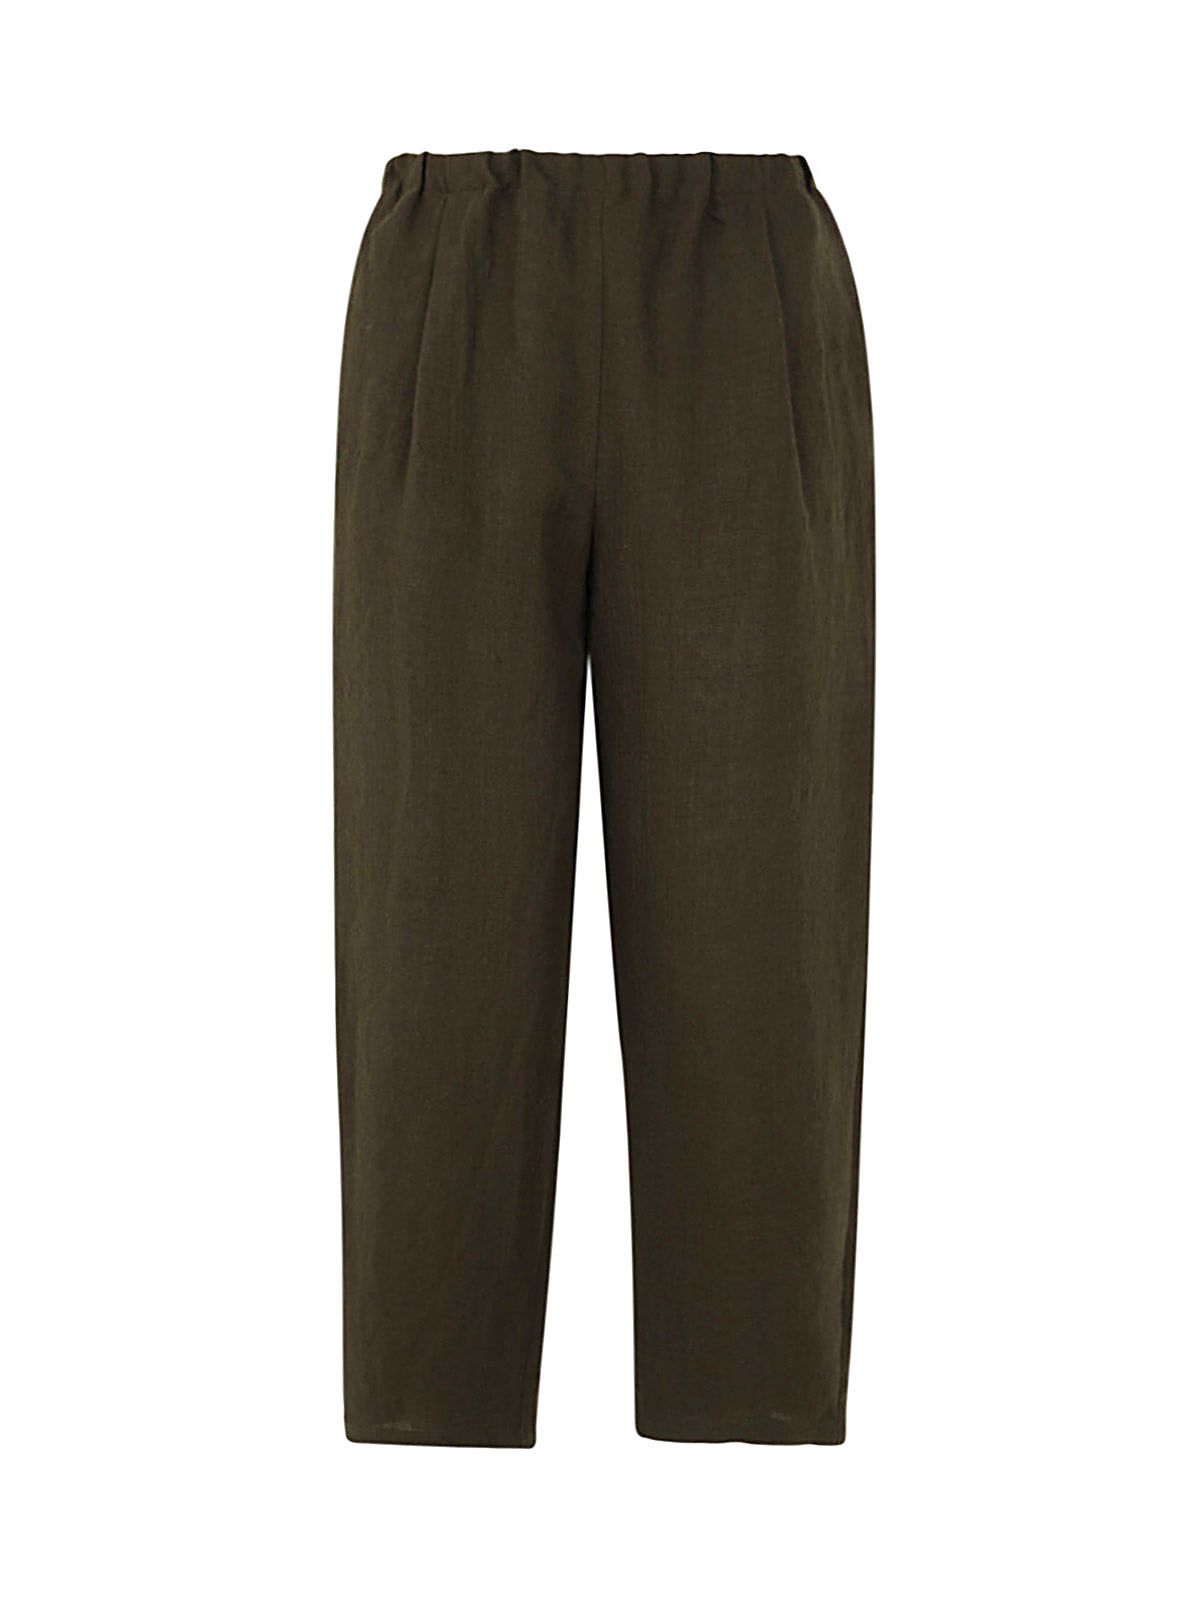 A Punto B Wool And Linen Elastic Slim Trousers In Dark